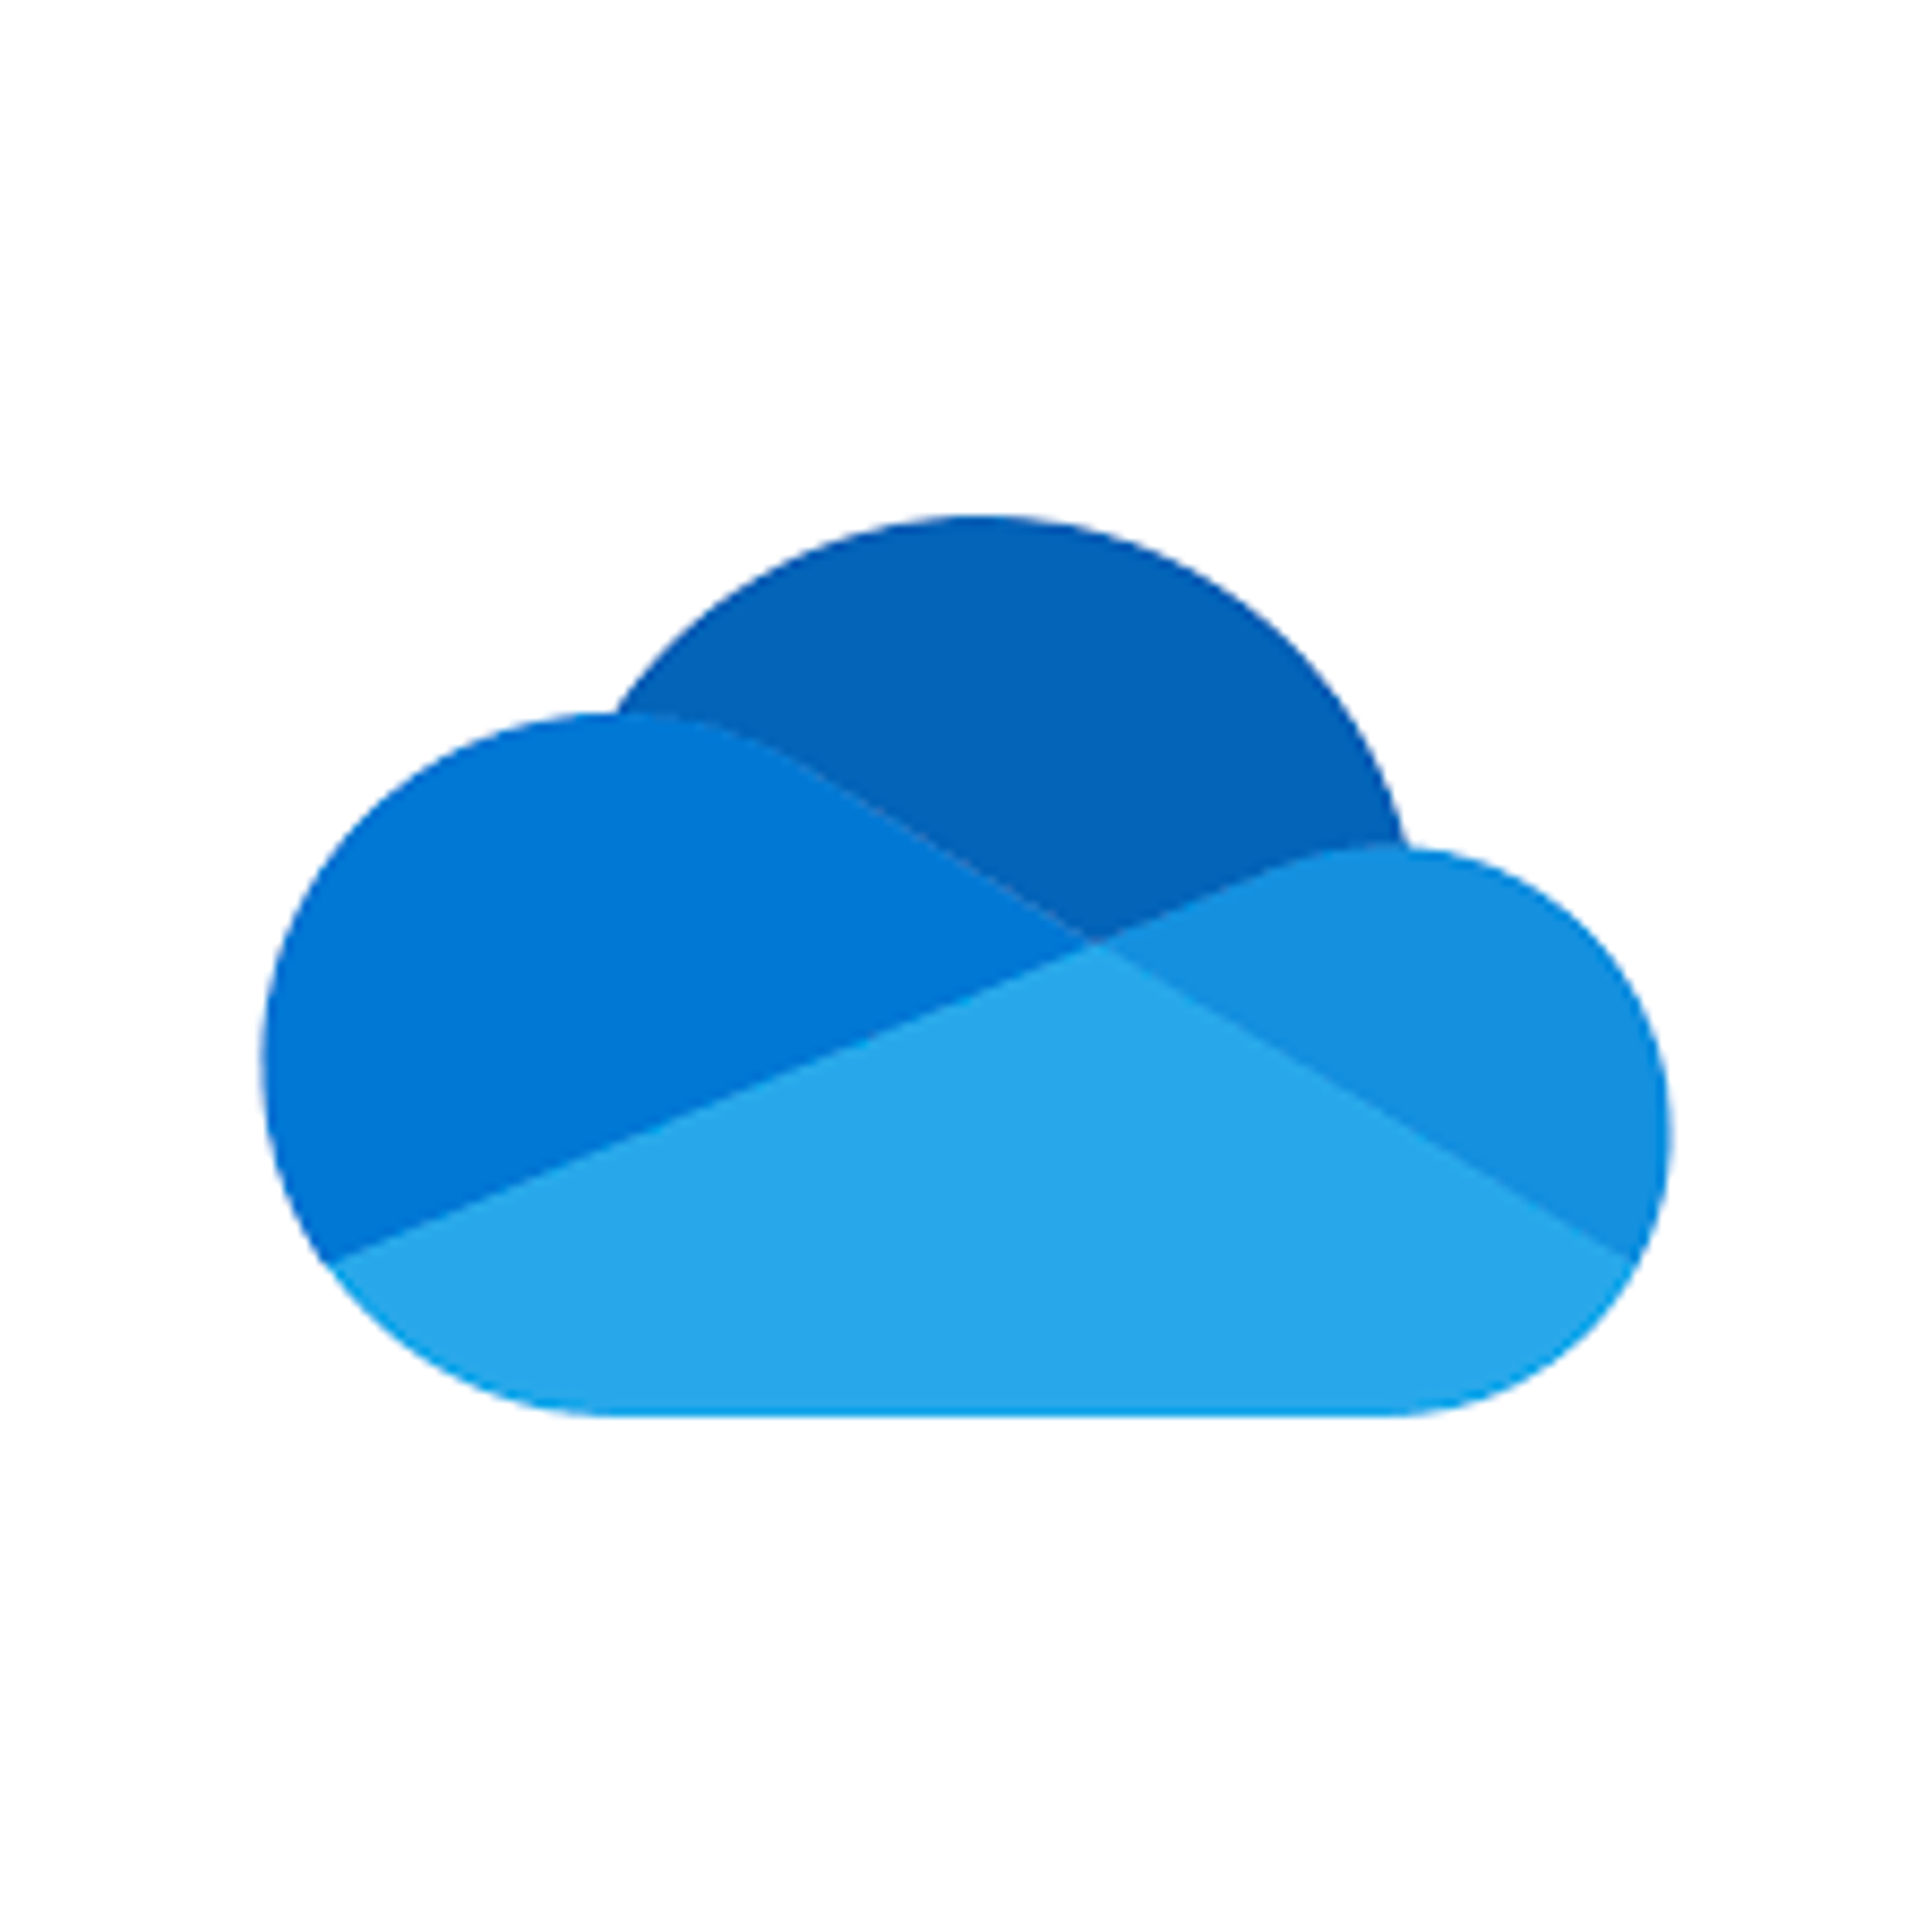 Sync files to OneDrive with a form